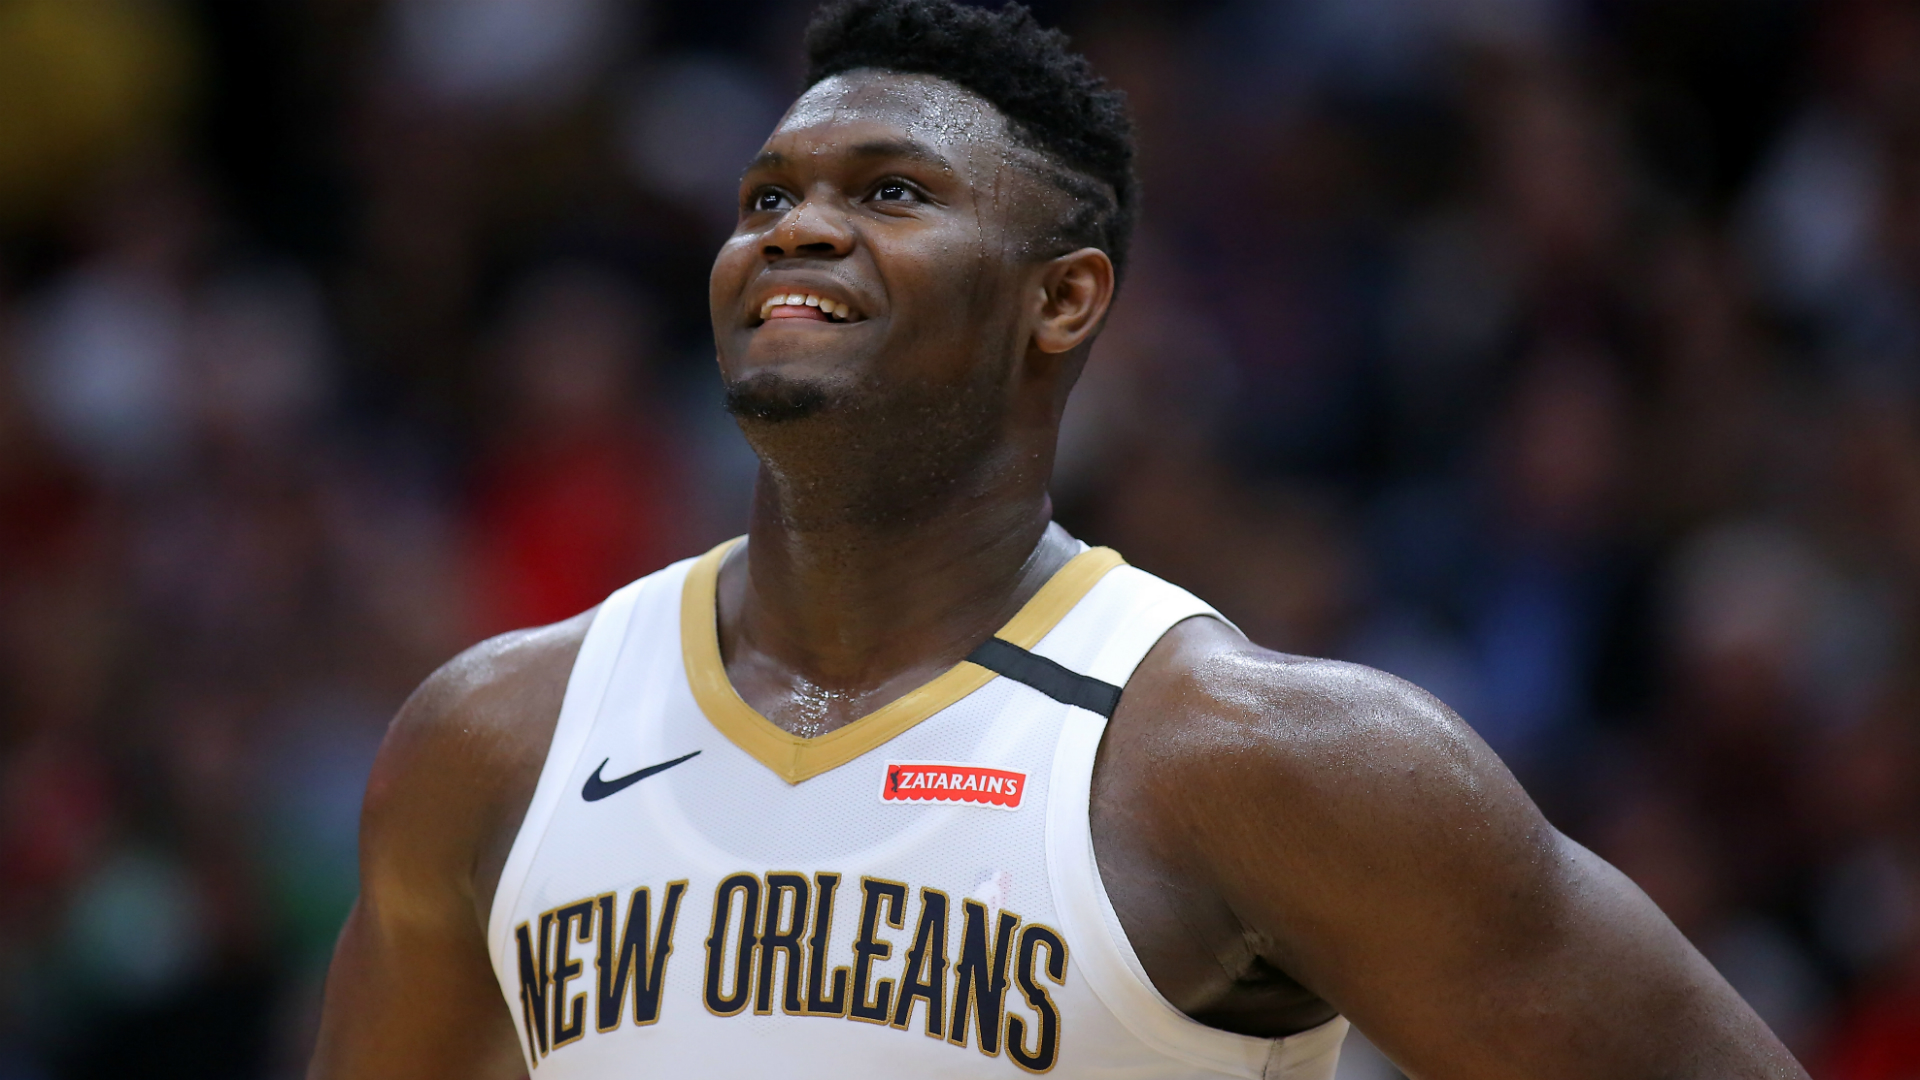 People Are Angry Zion Williamson Is The Nba 2k Next Gen Athlete